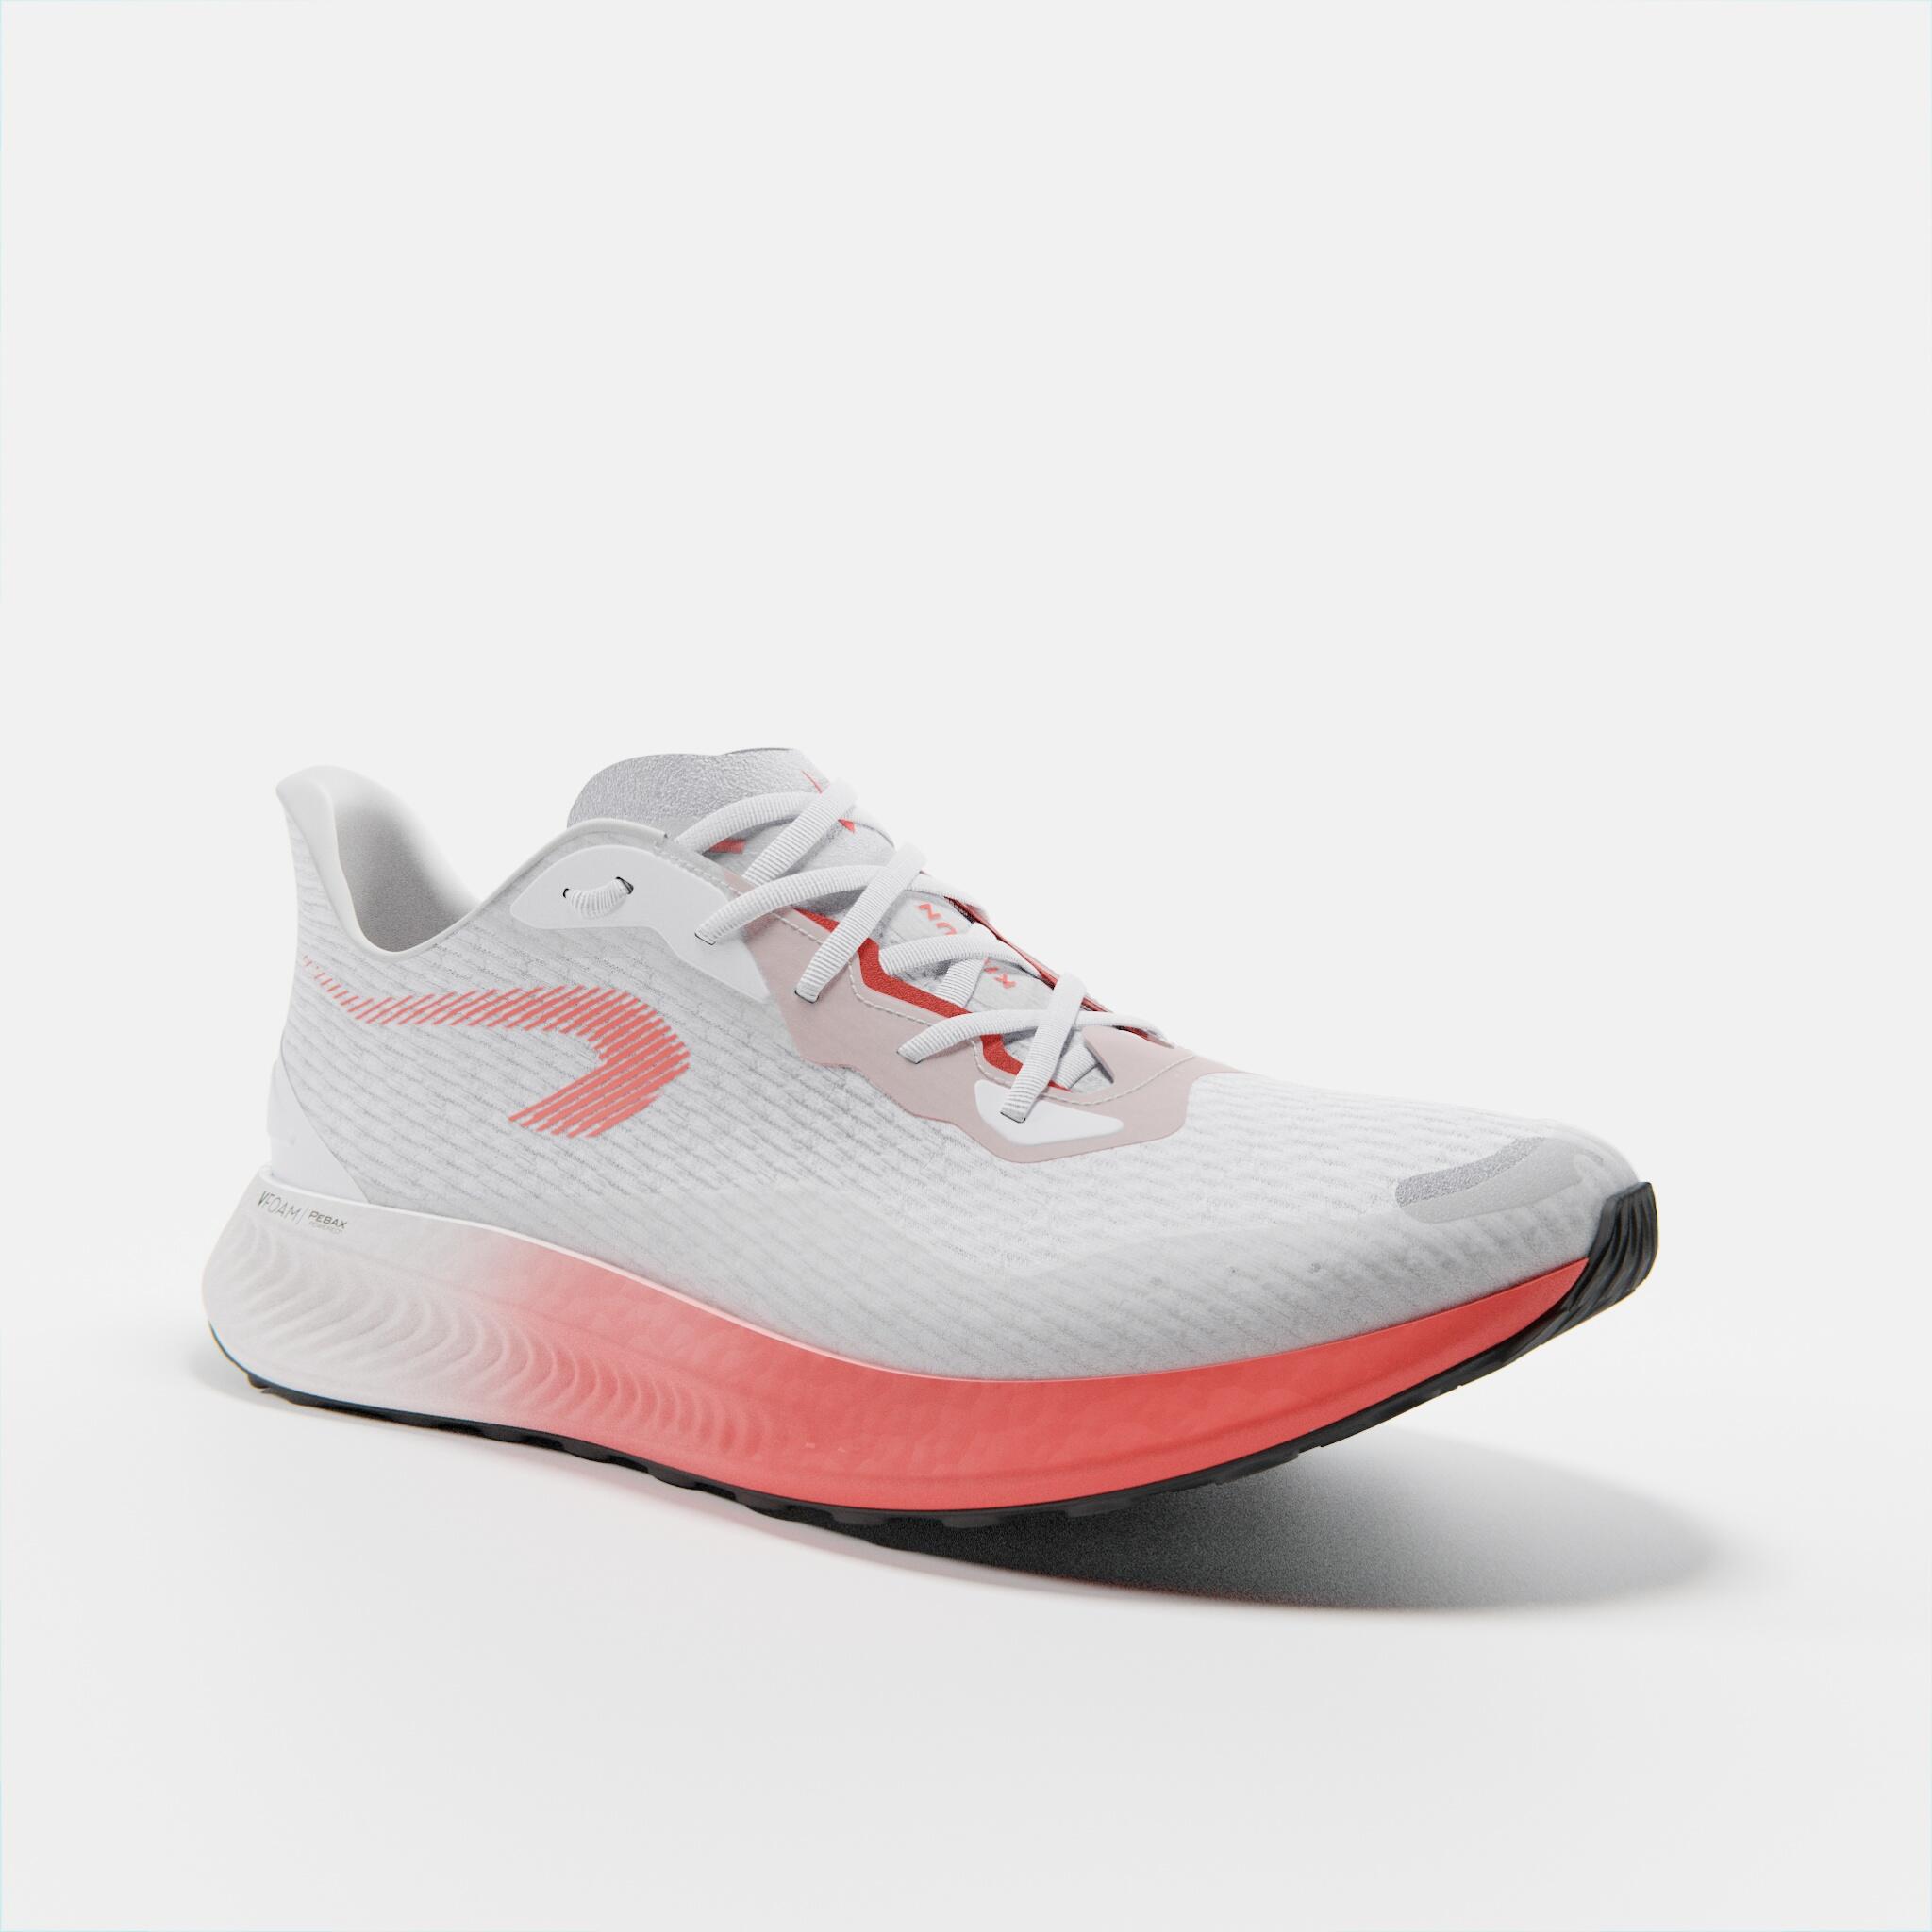 KIPRUN KD500 3 WOMEN'S RUNNING SHOES - WHITE AND CORAL 12/13